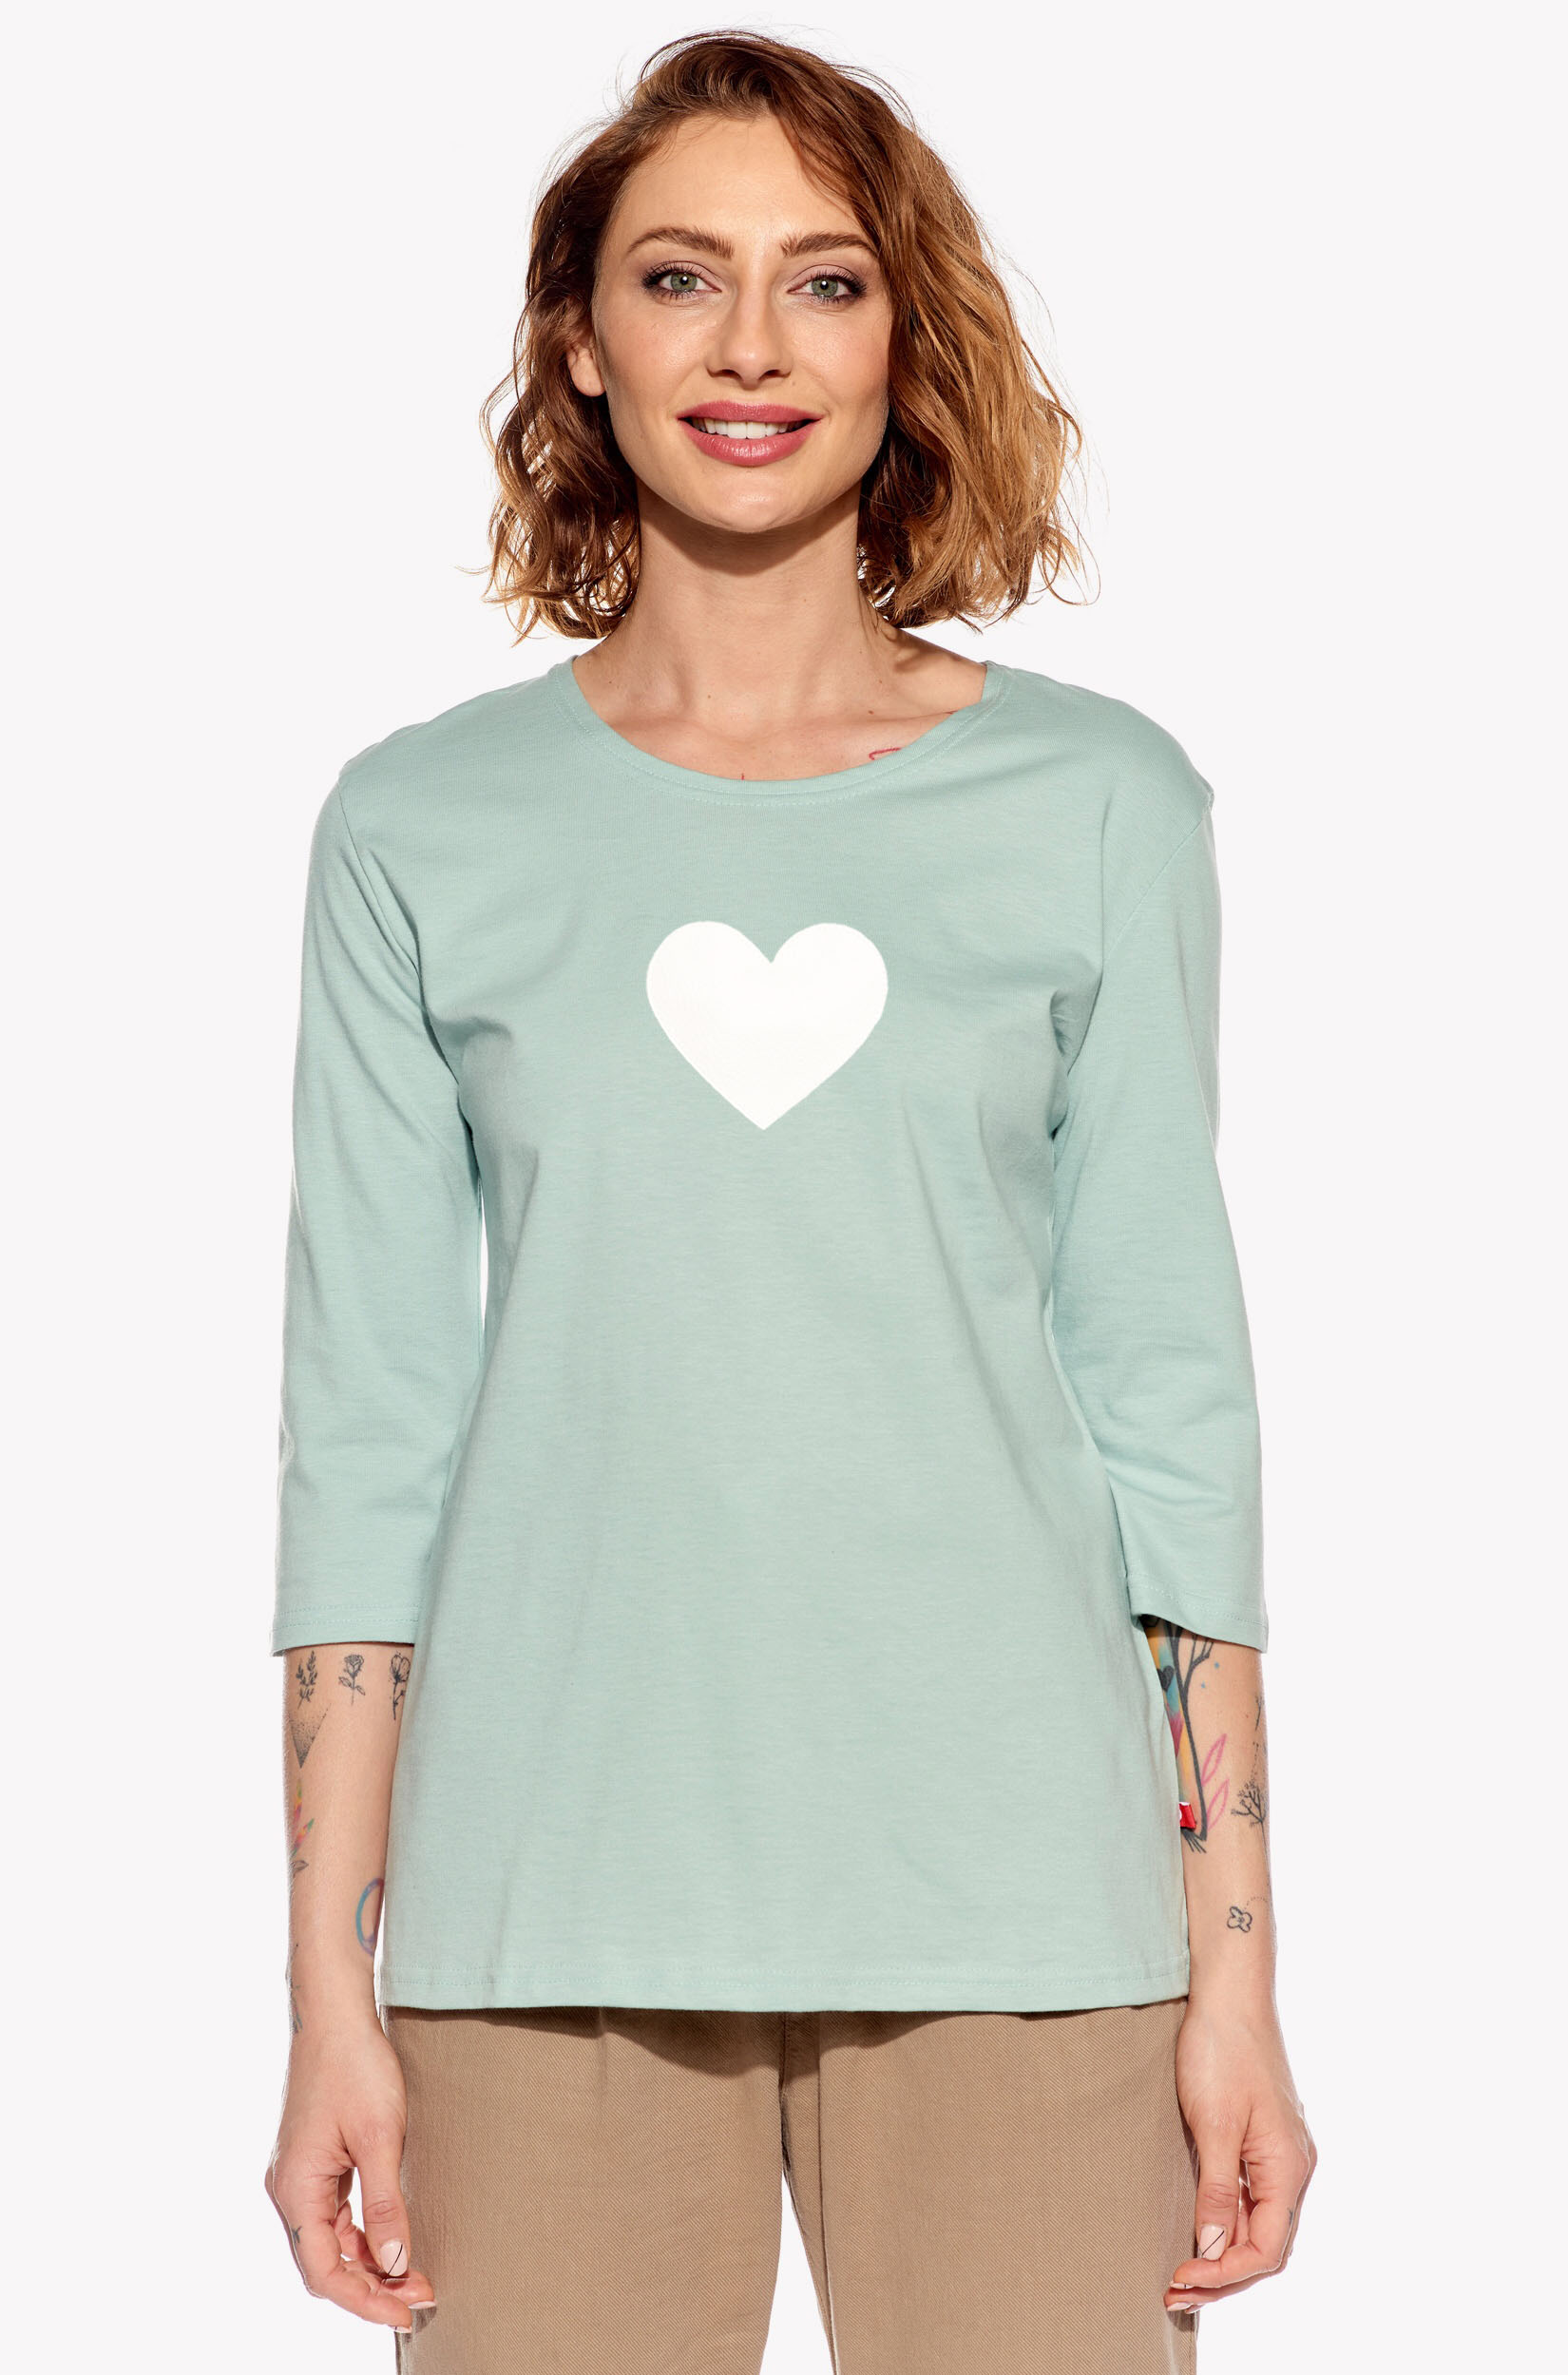 Shirt with heart